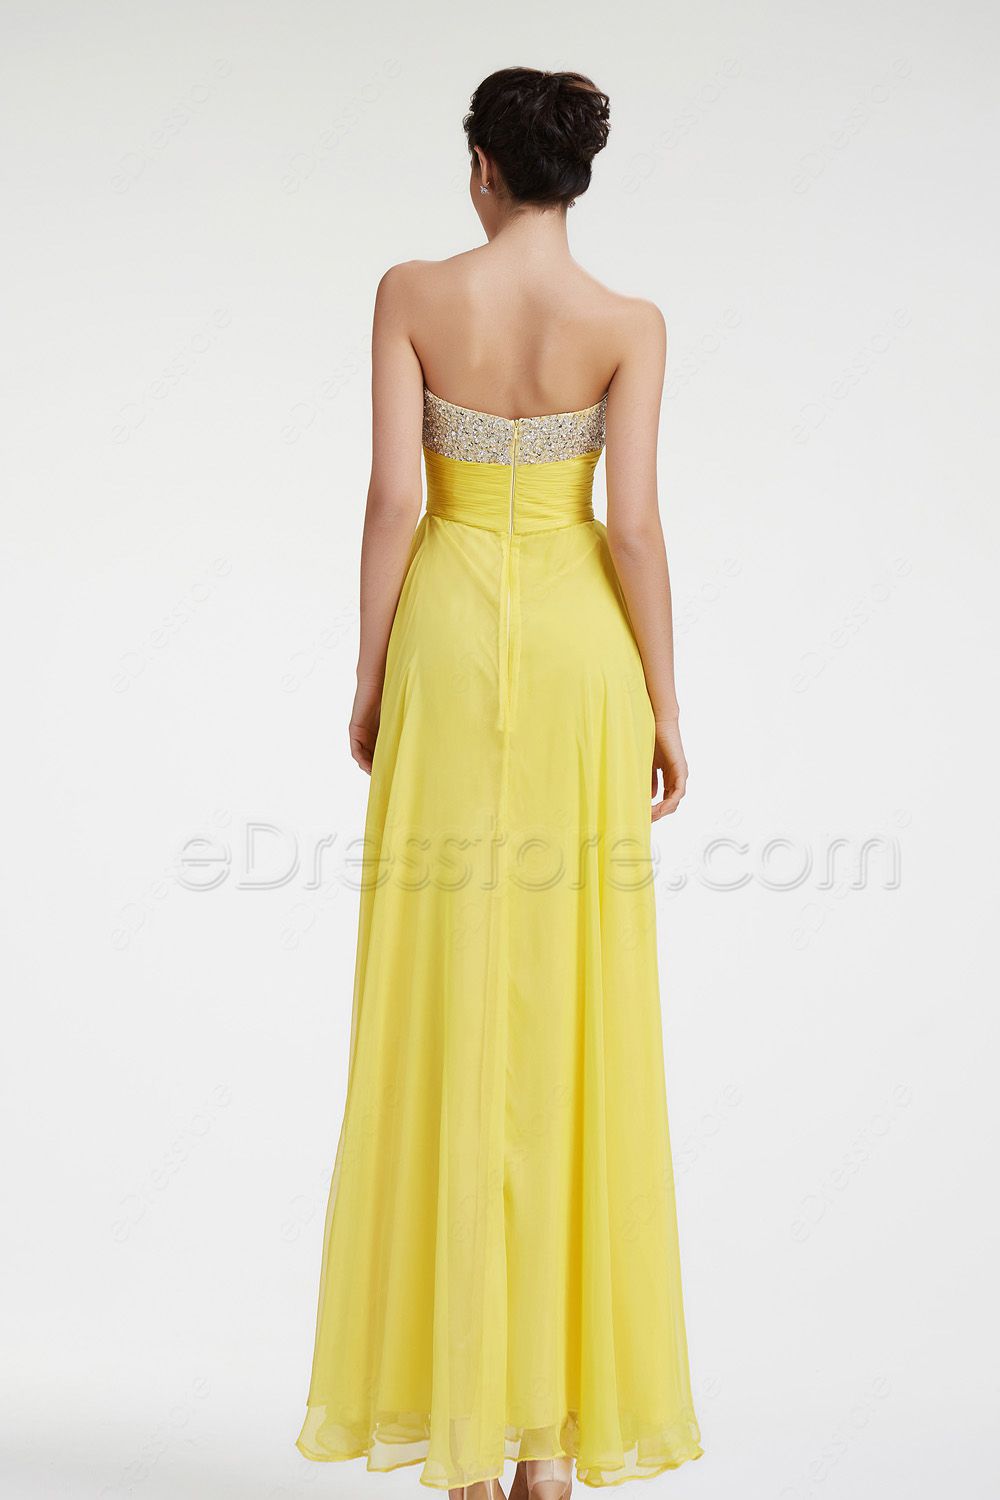 Yellow Beaded Sparkly Prom Dresses Flowing Pageant Dresses | eDresstore